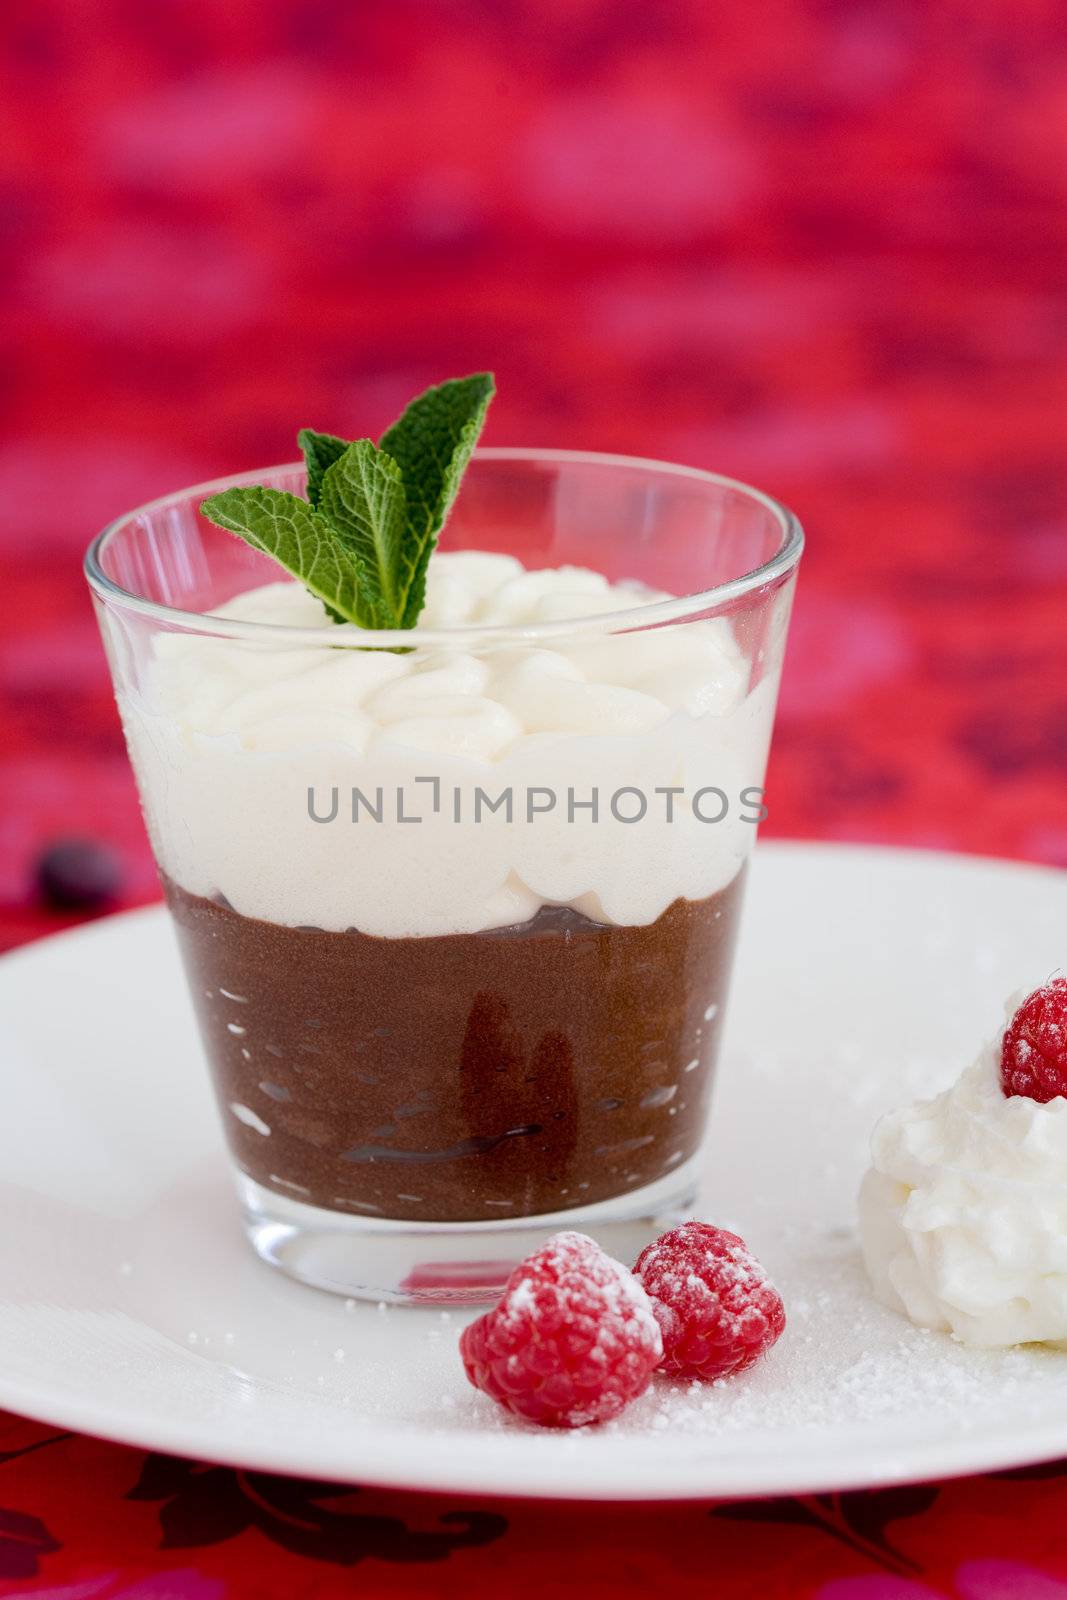 Delicious chocolate dessert with a mint leave